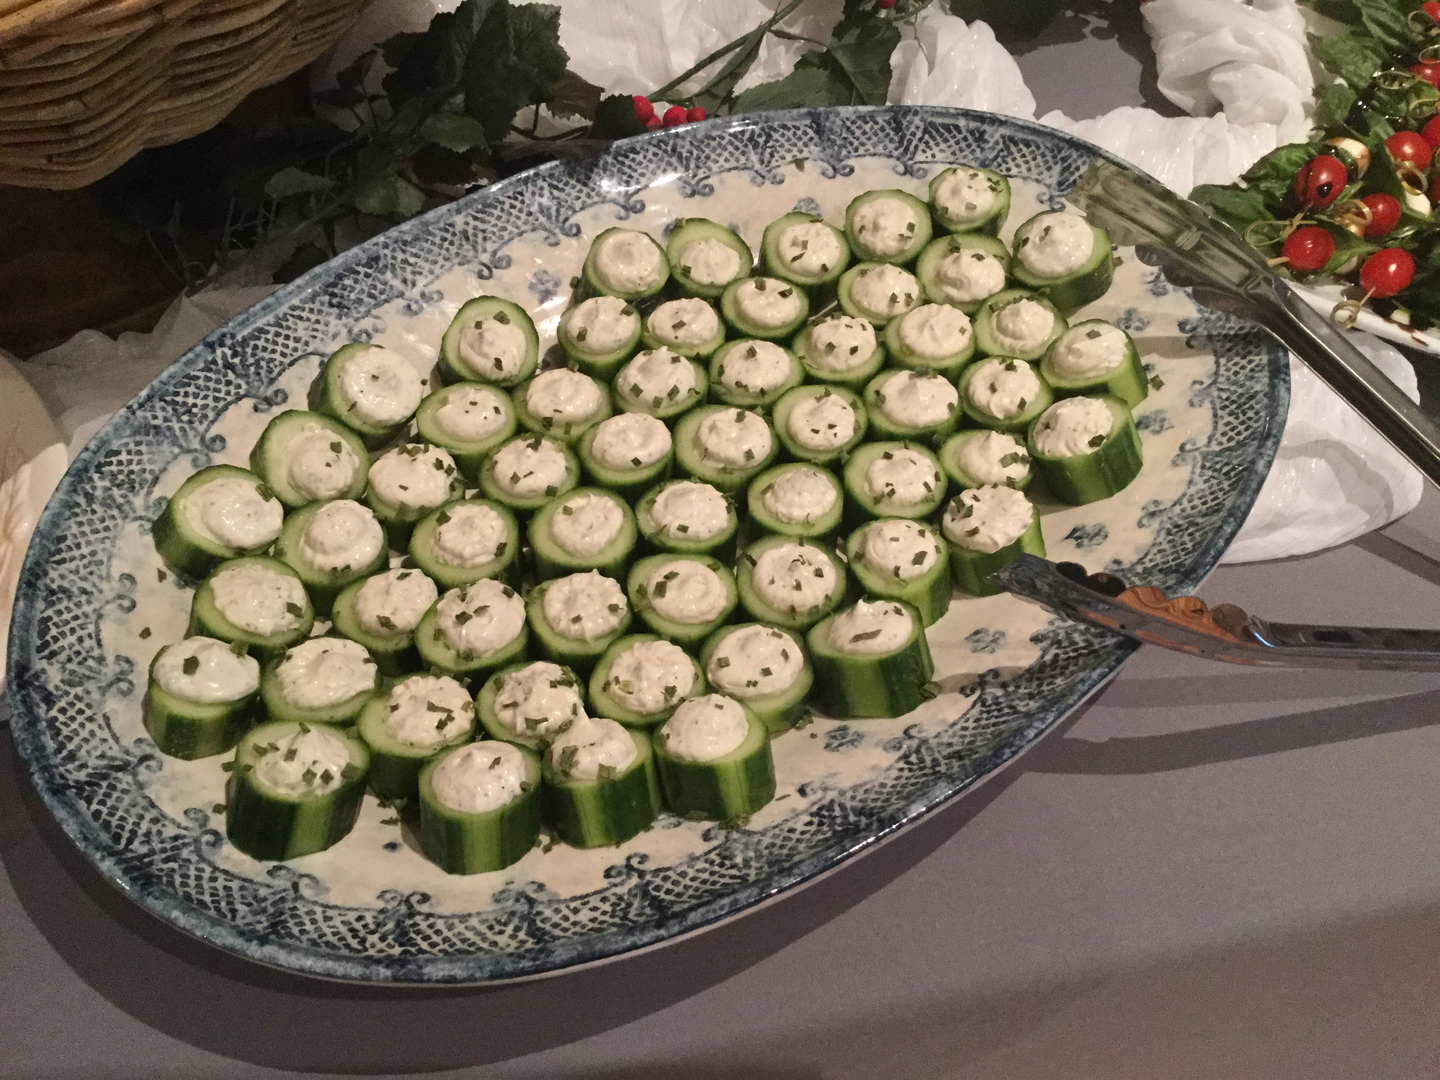 A platter of cucumber slices with cheese on top.